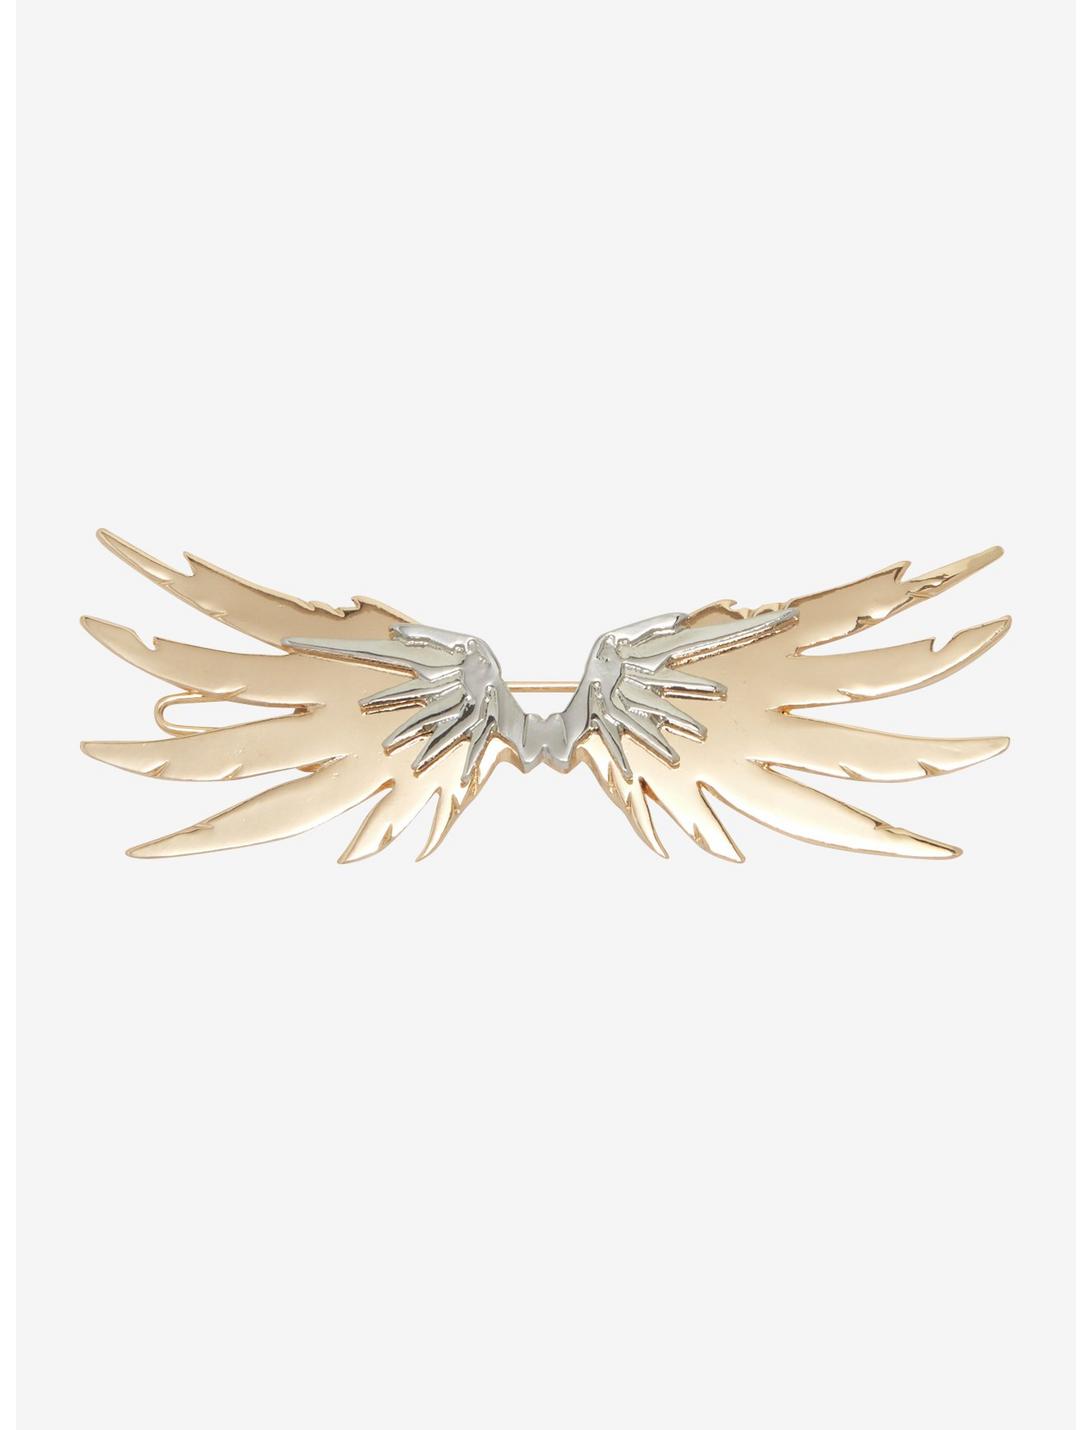 Her Universe Overwatch Mercy Wing Hair Clip - BoxLunch Exclusive, , hi-res